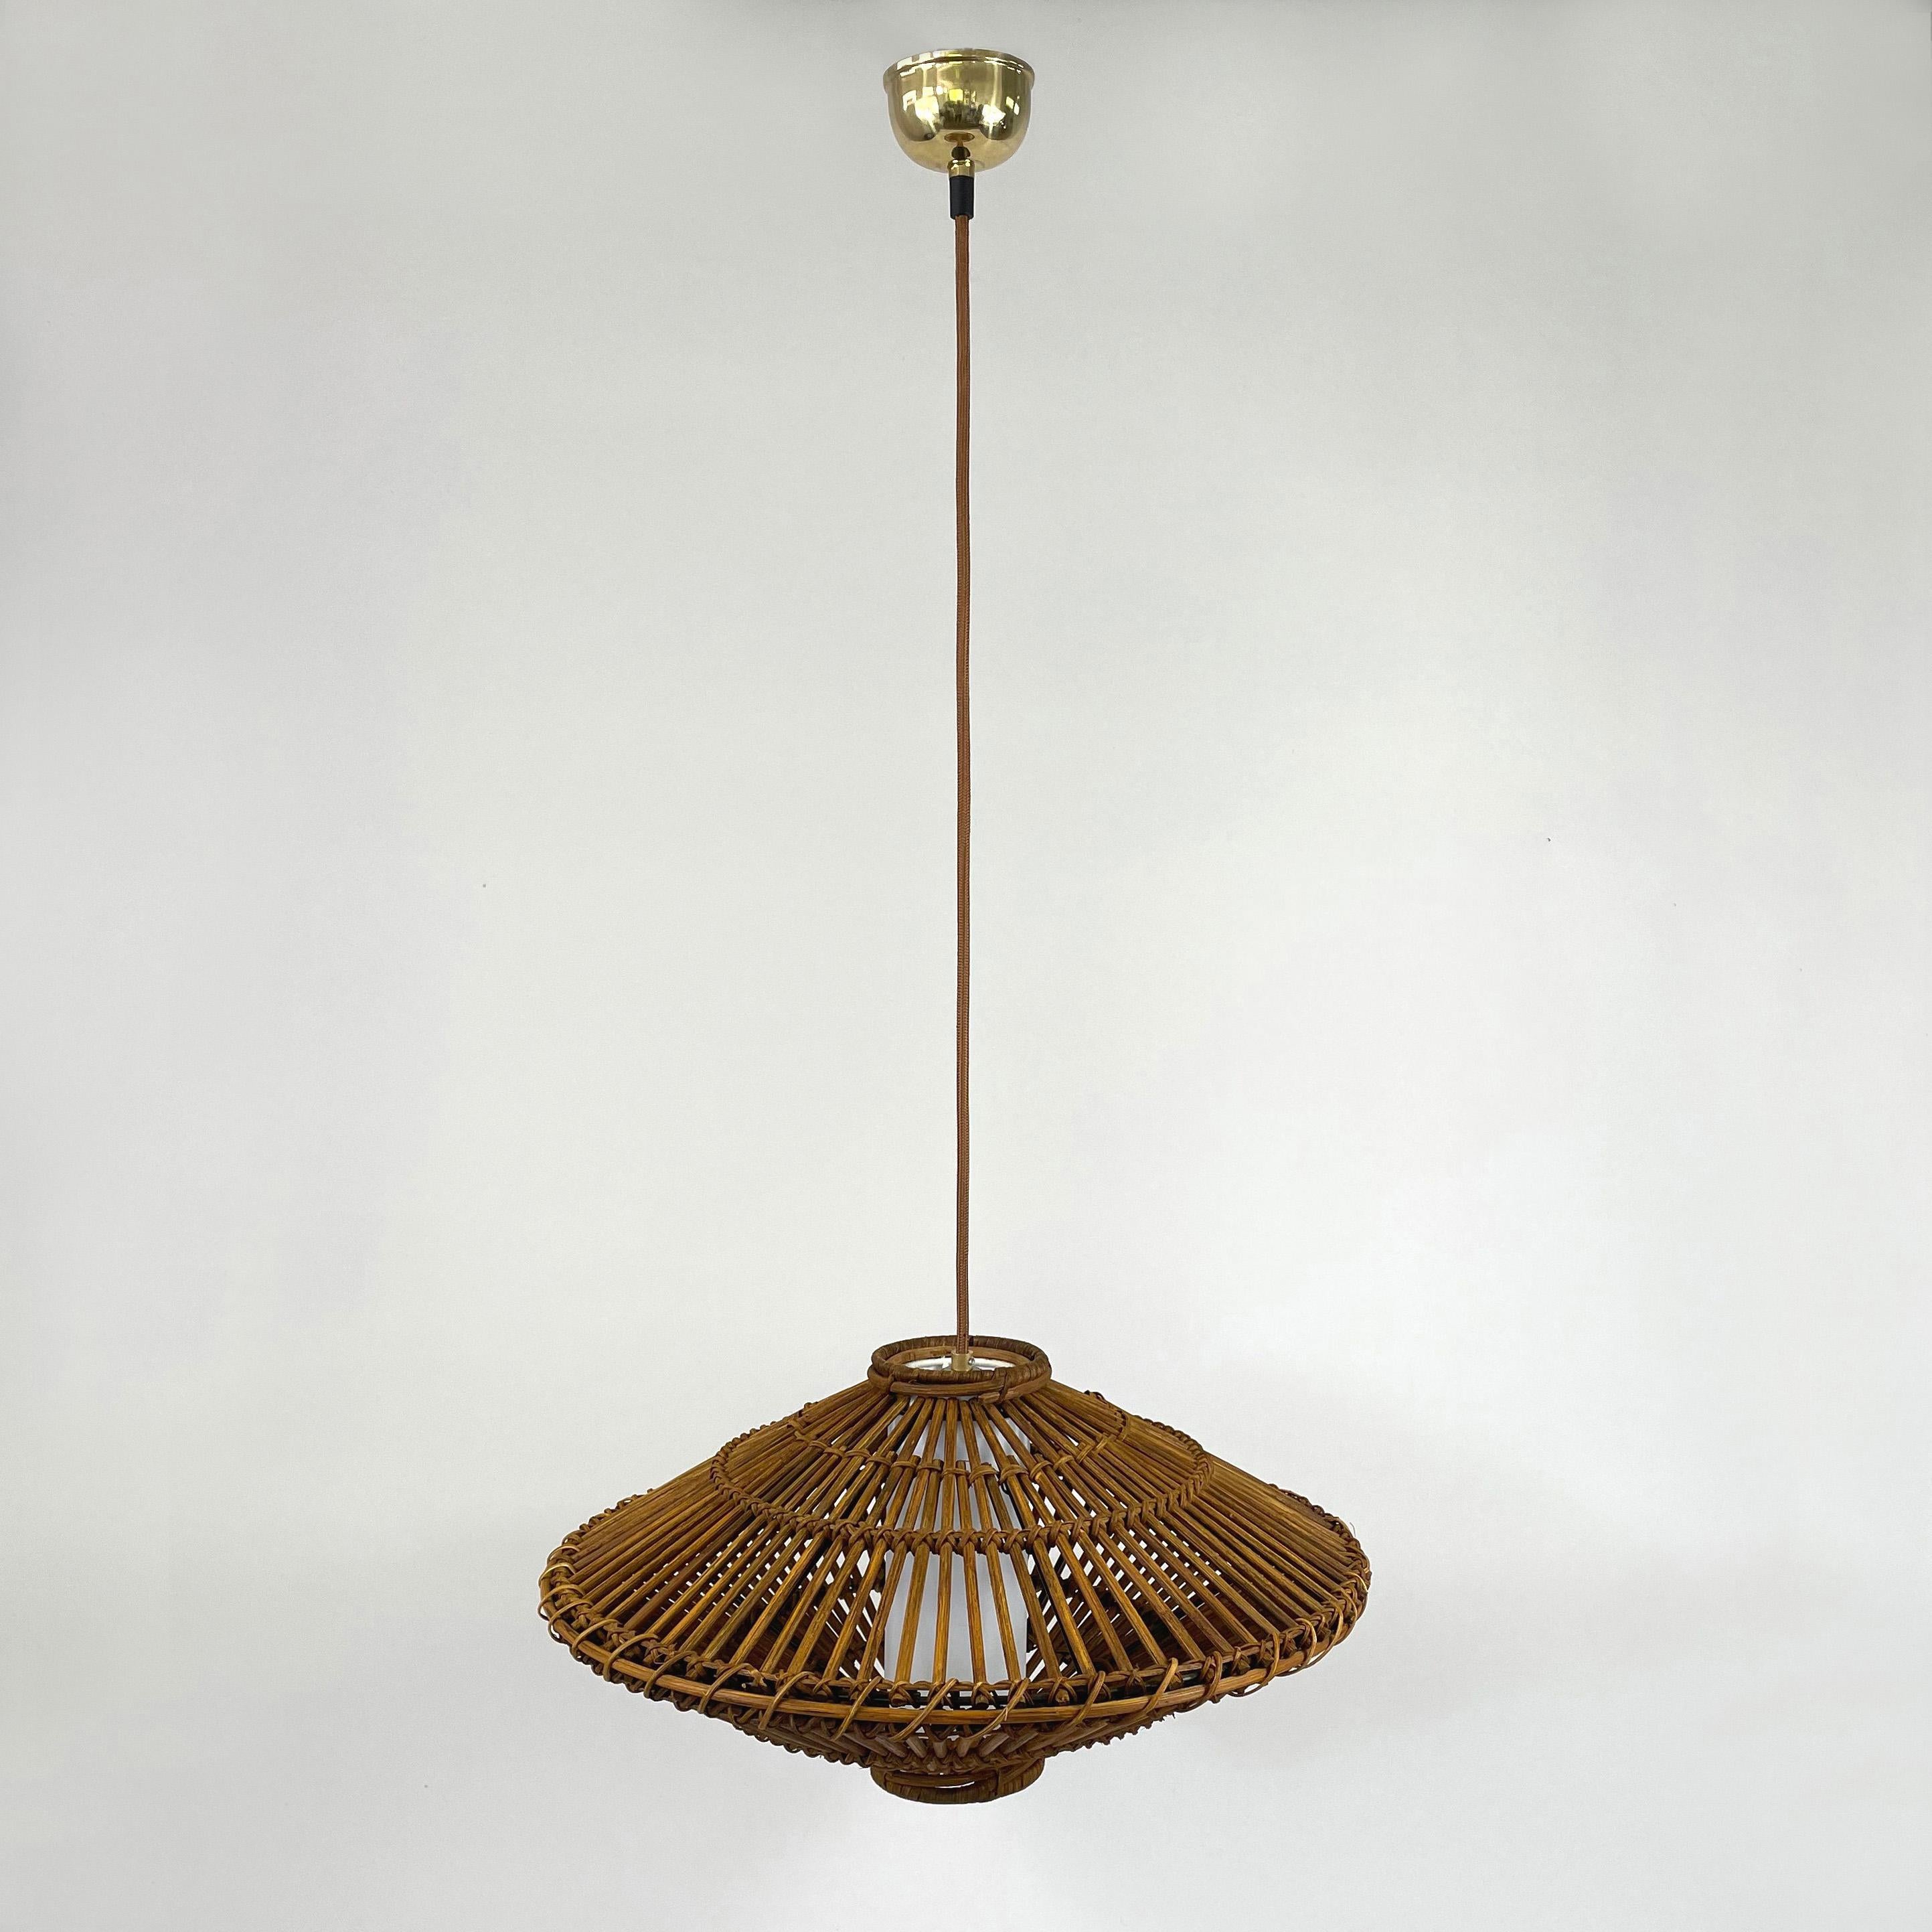 Midcentury French Rattan Wicker Pendant, 1960s For Sale 10